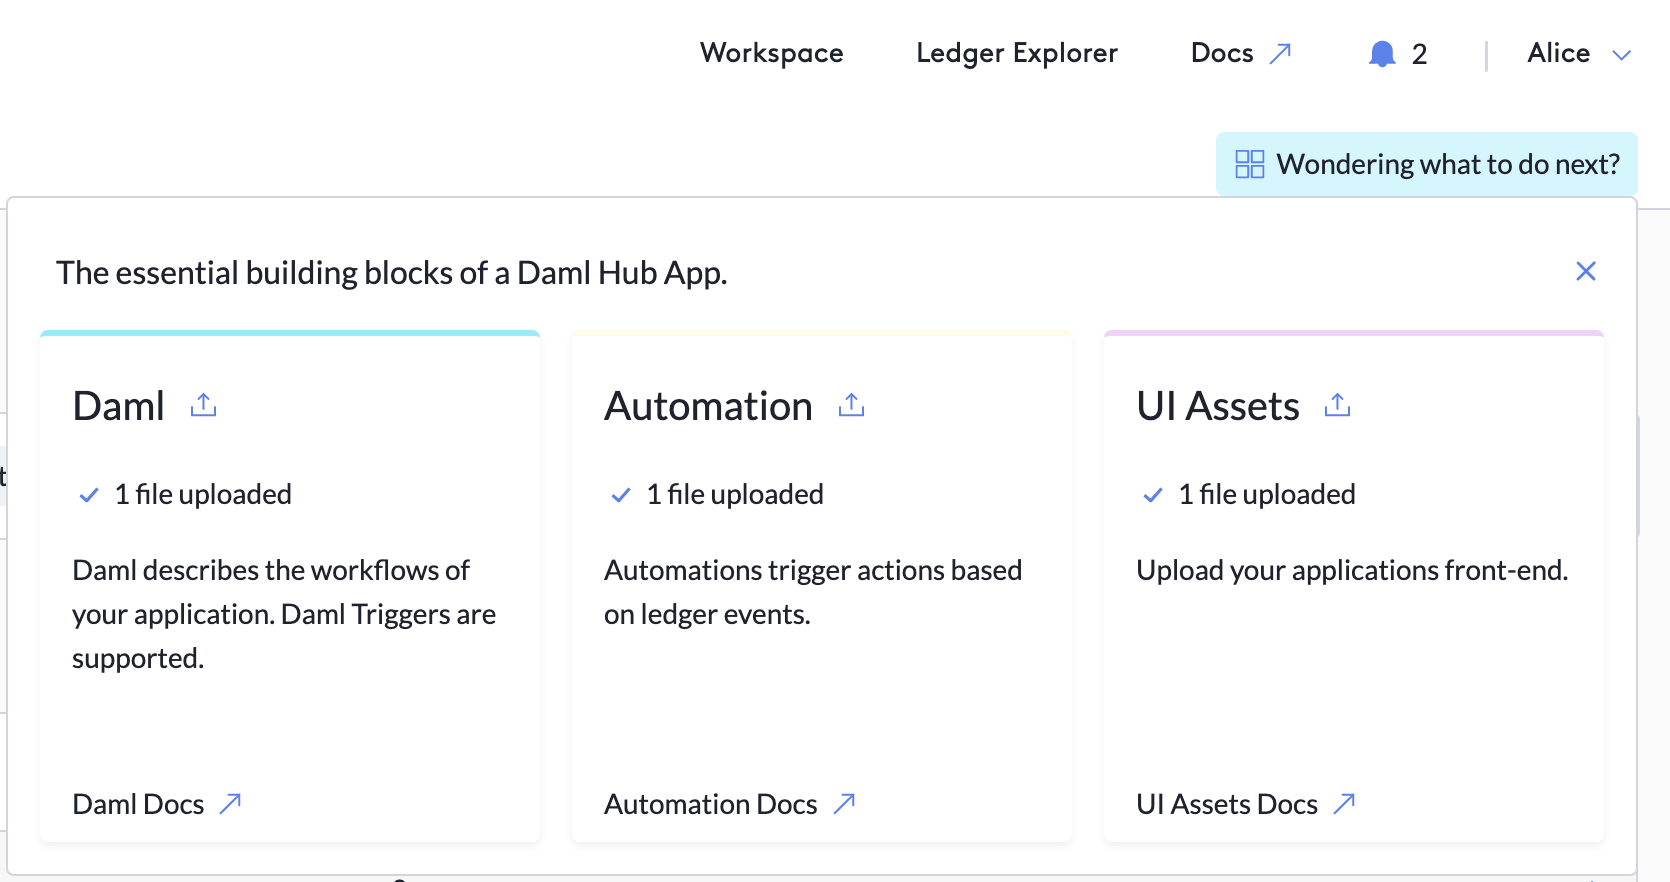 The Quick Build page, with the Daml, Automation, and UI Asset tiles.